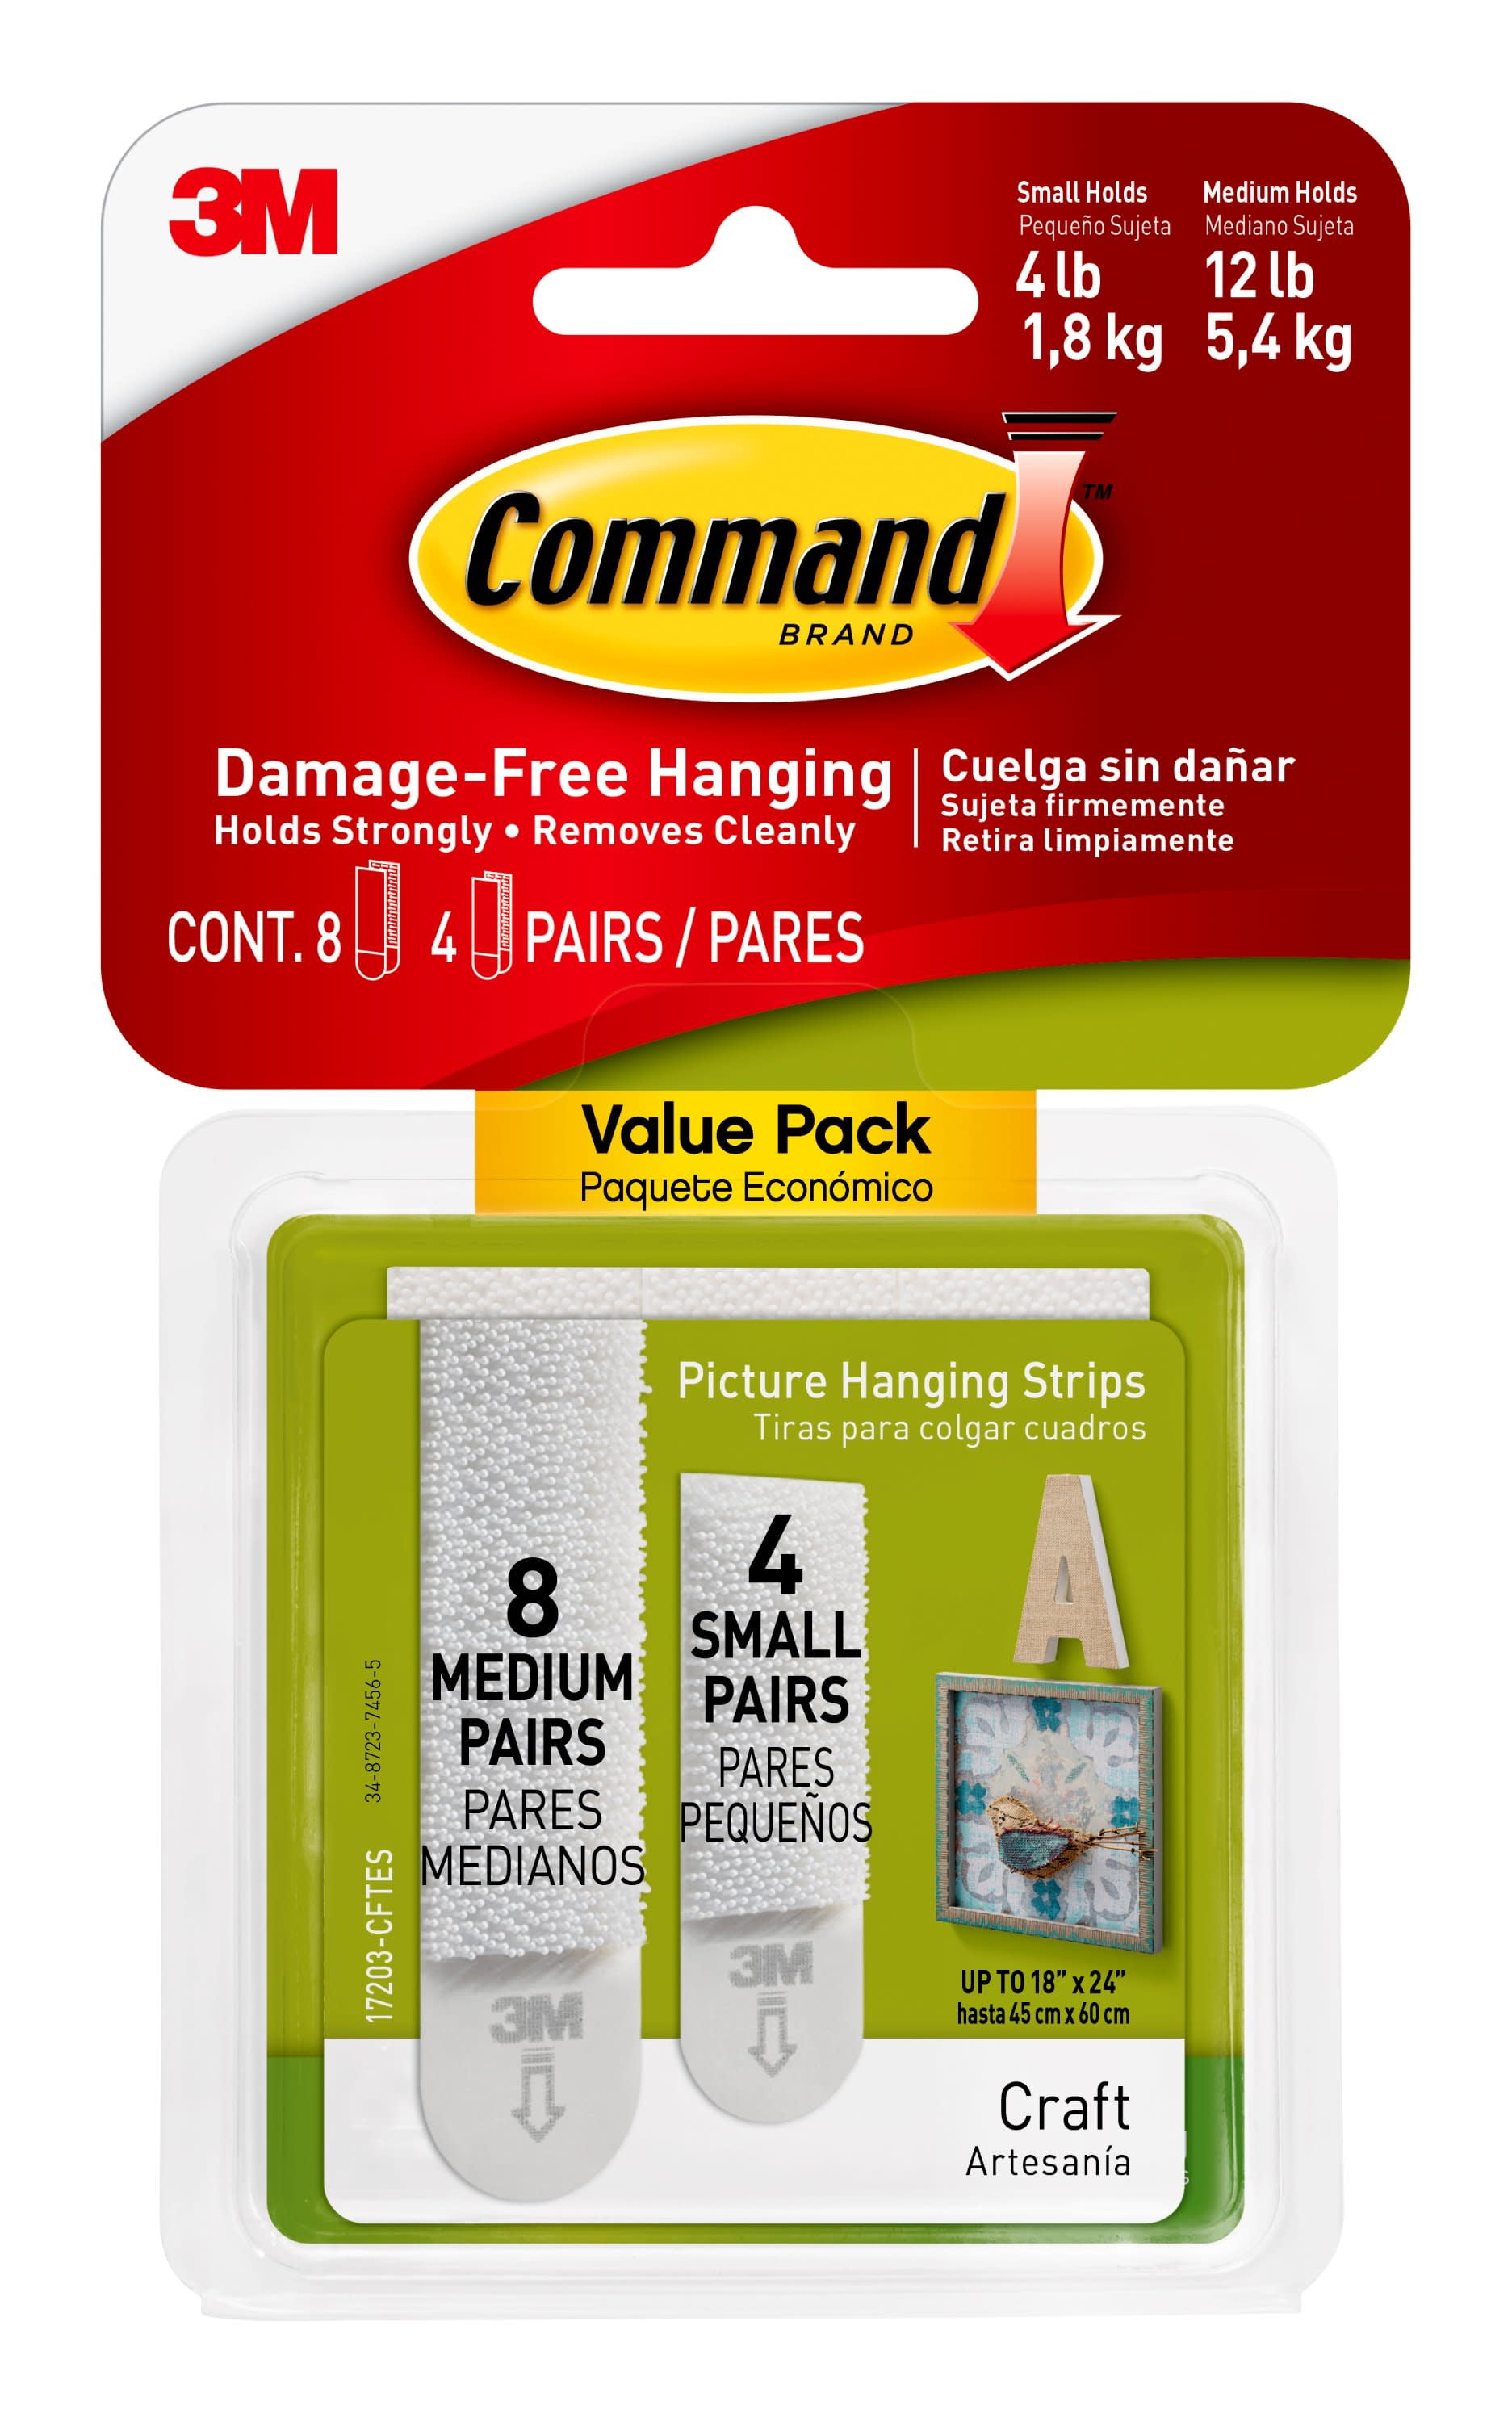 8 Pairs Large 2 Pack Command Picture Hanging Strips Value Pack 4 Pairs Medium